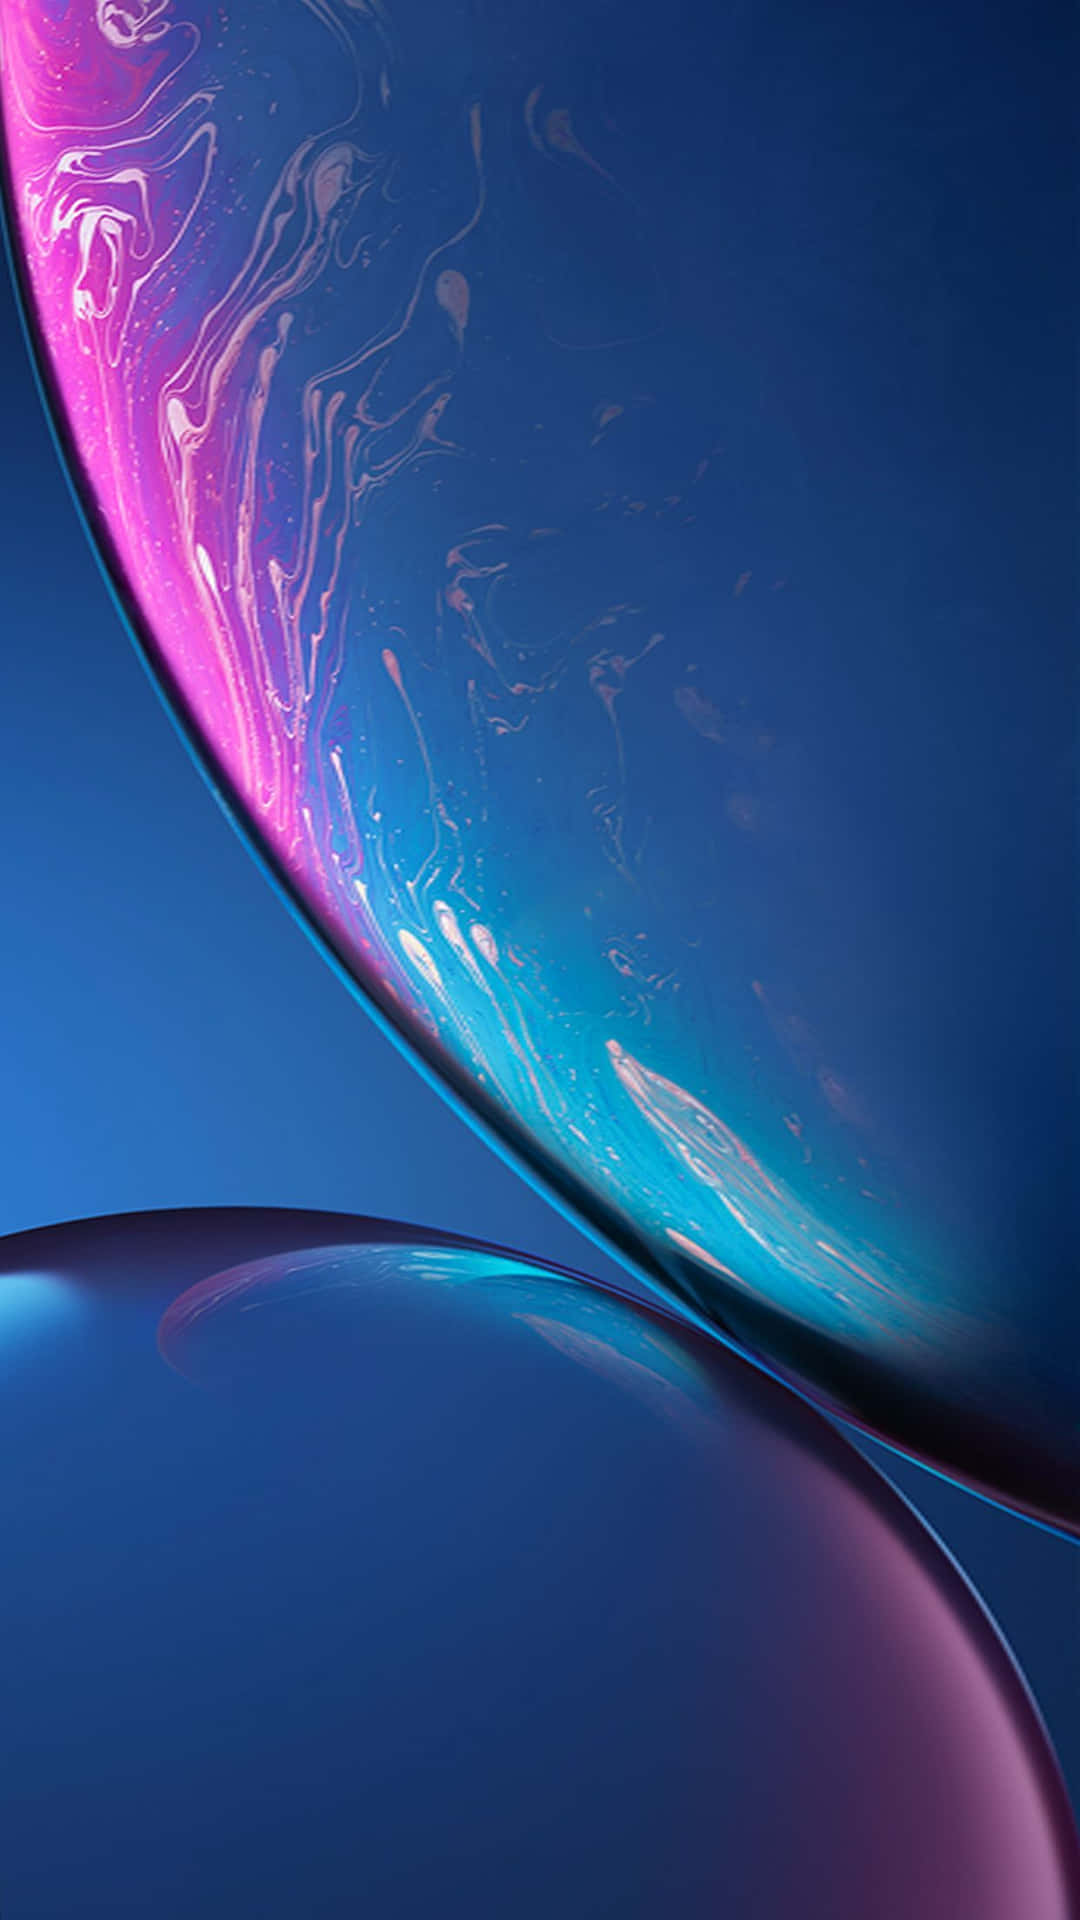 High-Definition Stock Image of the Apple Iphone Xr Wallpaper